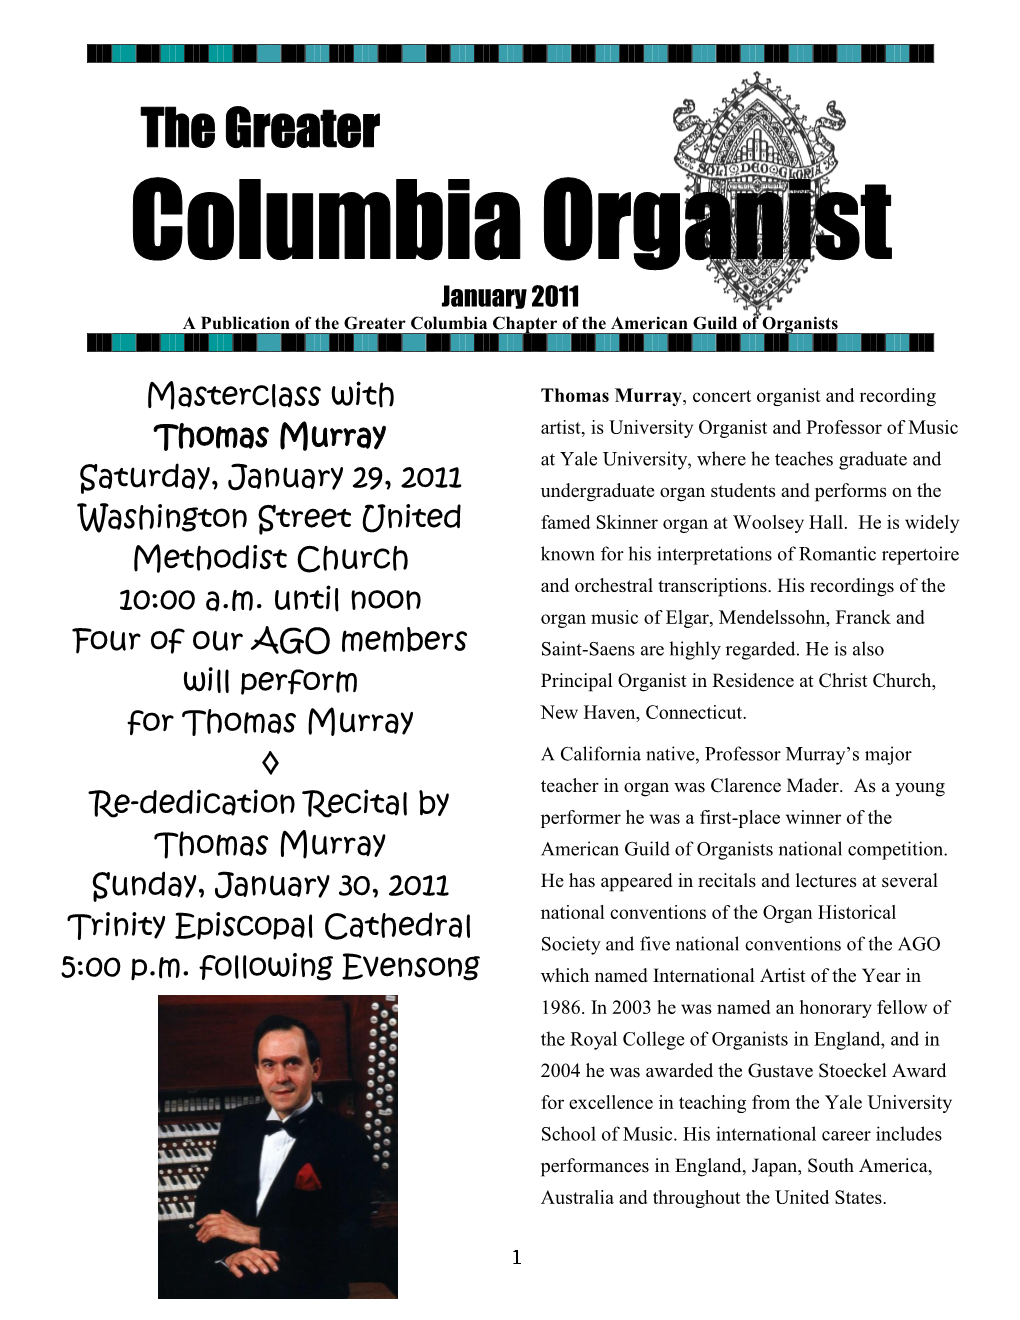 January 2011 a Publication of the Greater Columbia Chapter of the American Guild of Organists